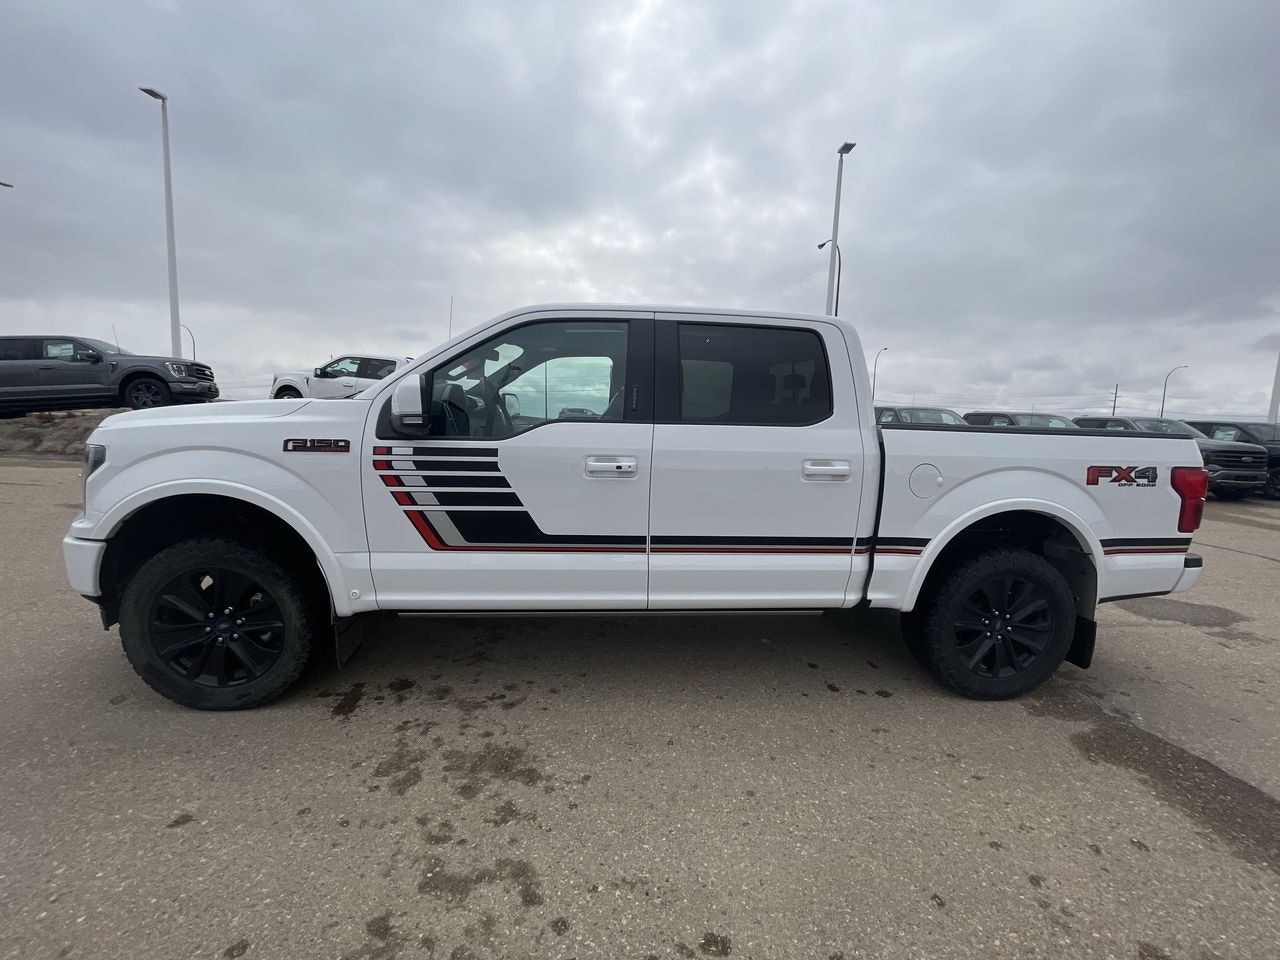 2019 Ford F-150 Crew Cab 4X4 LARIAT FX4 SPECIAL EDITION MOONROOF NAVIGATION (T123019A) Main Image